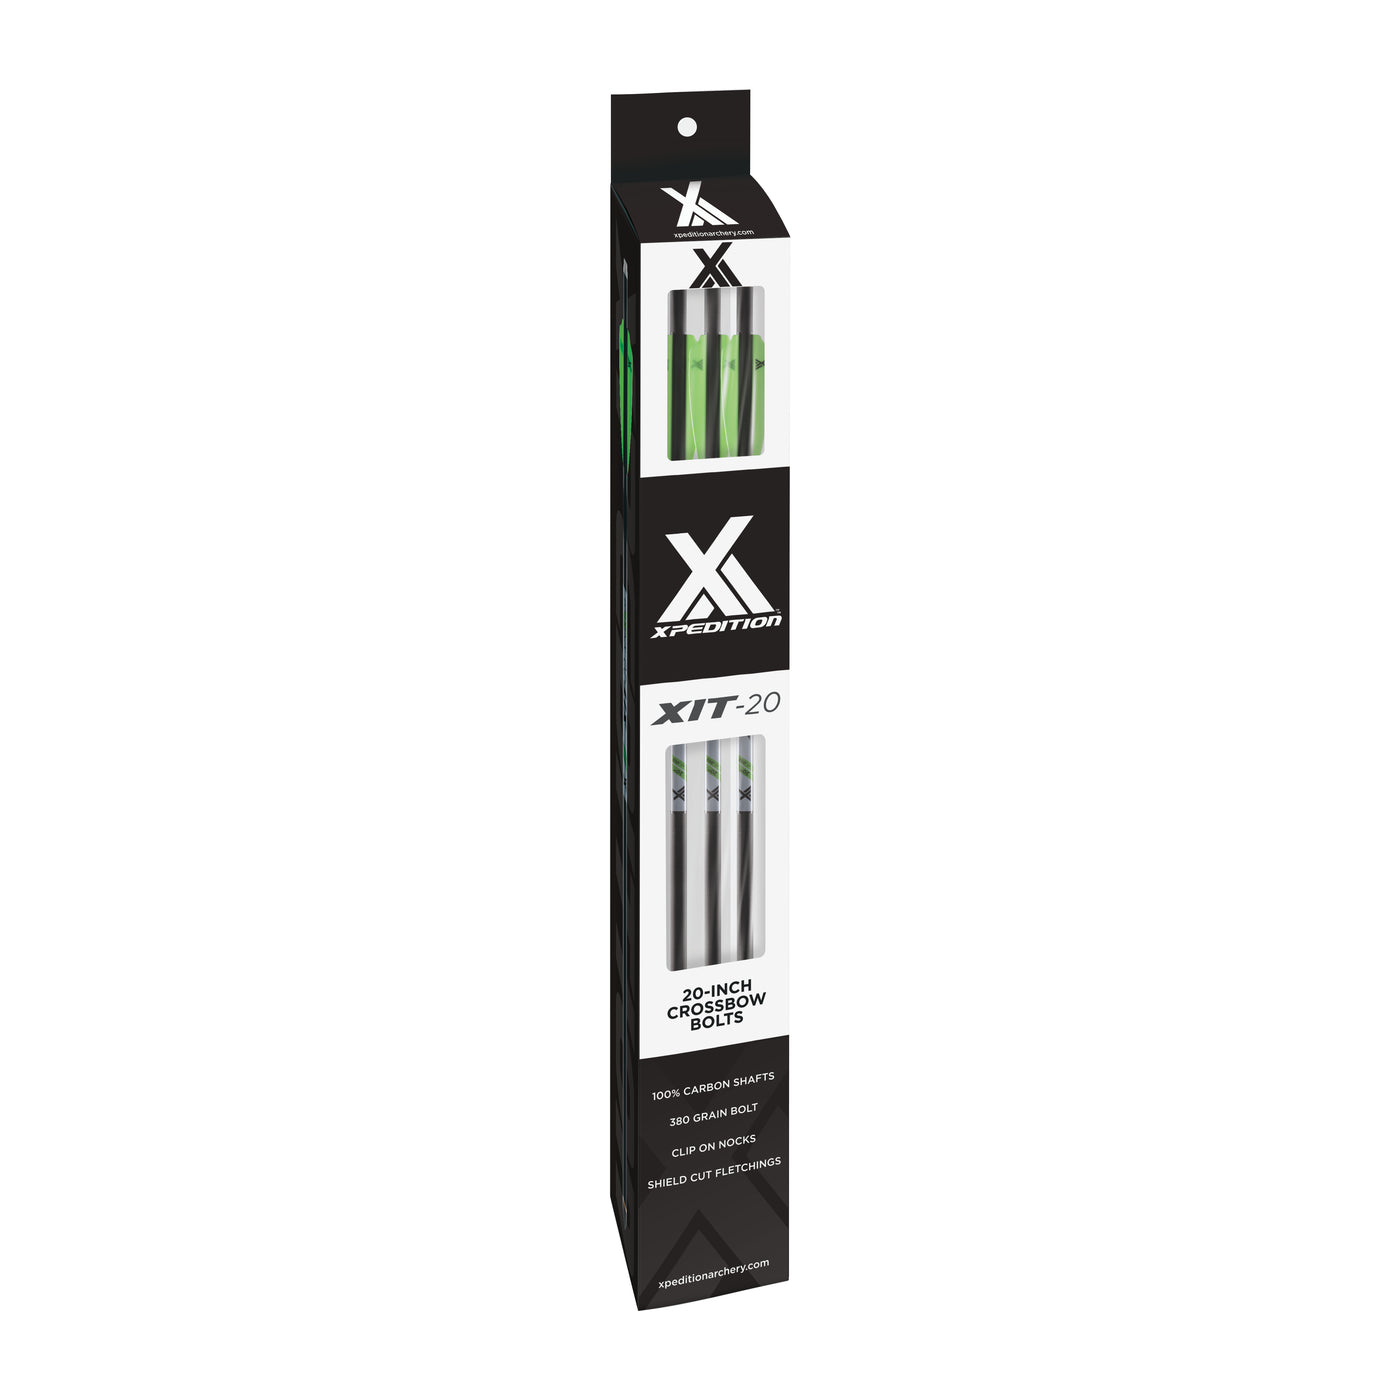 XIT-20 Crossbow Bolts